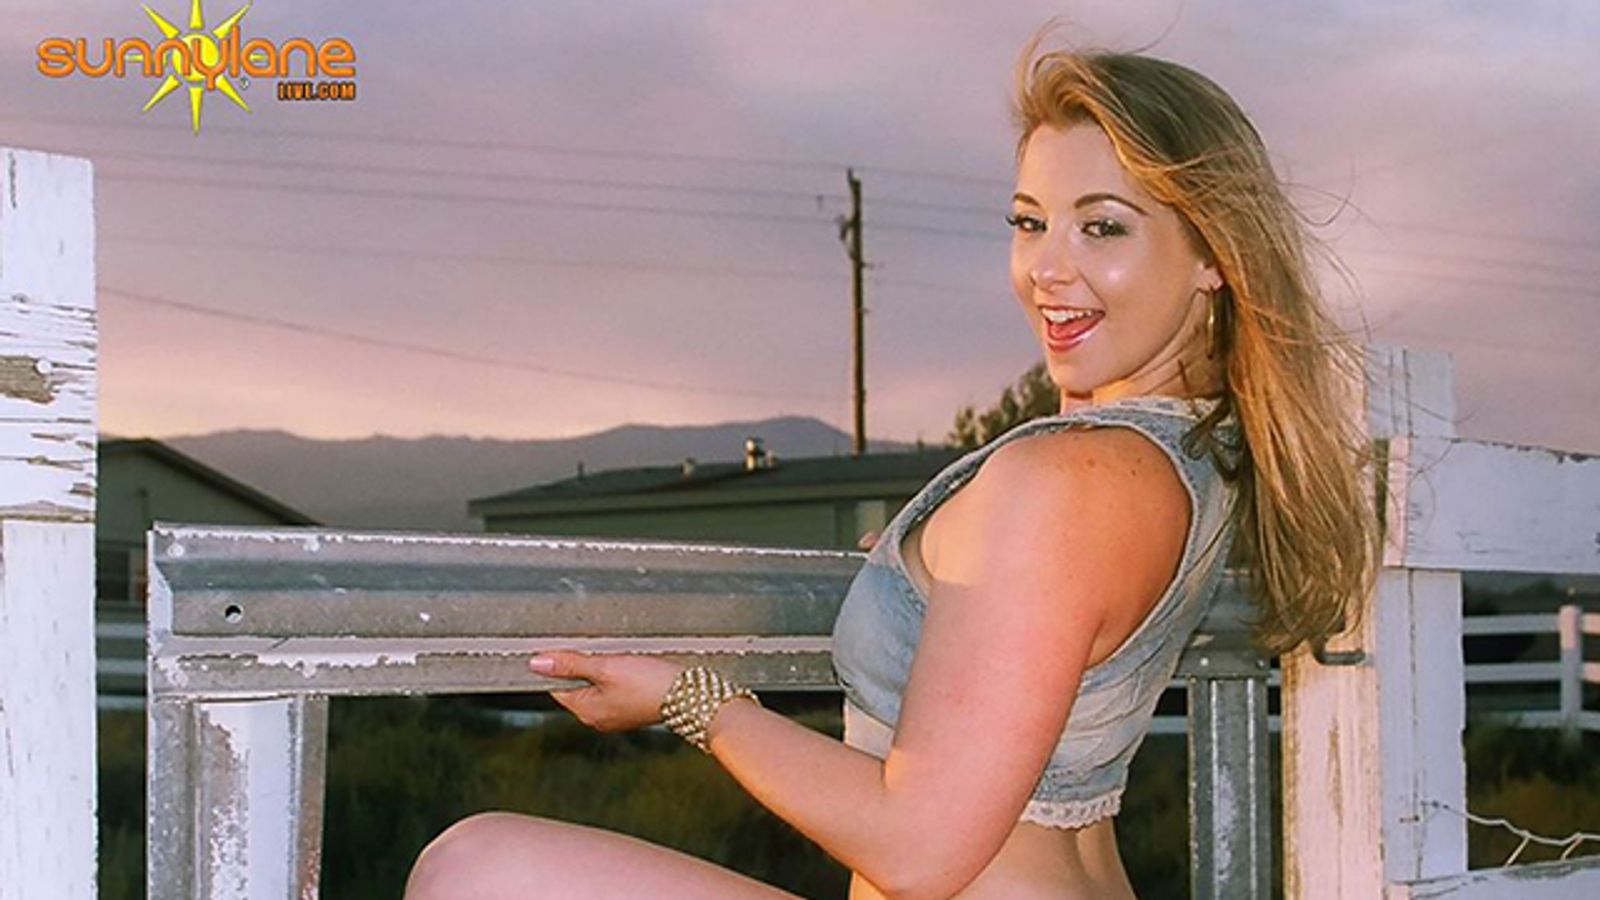 Sunny Lane Celebrates 10 Years in Adult With New Website